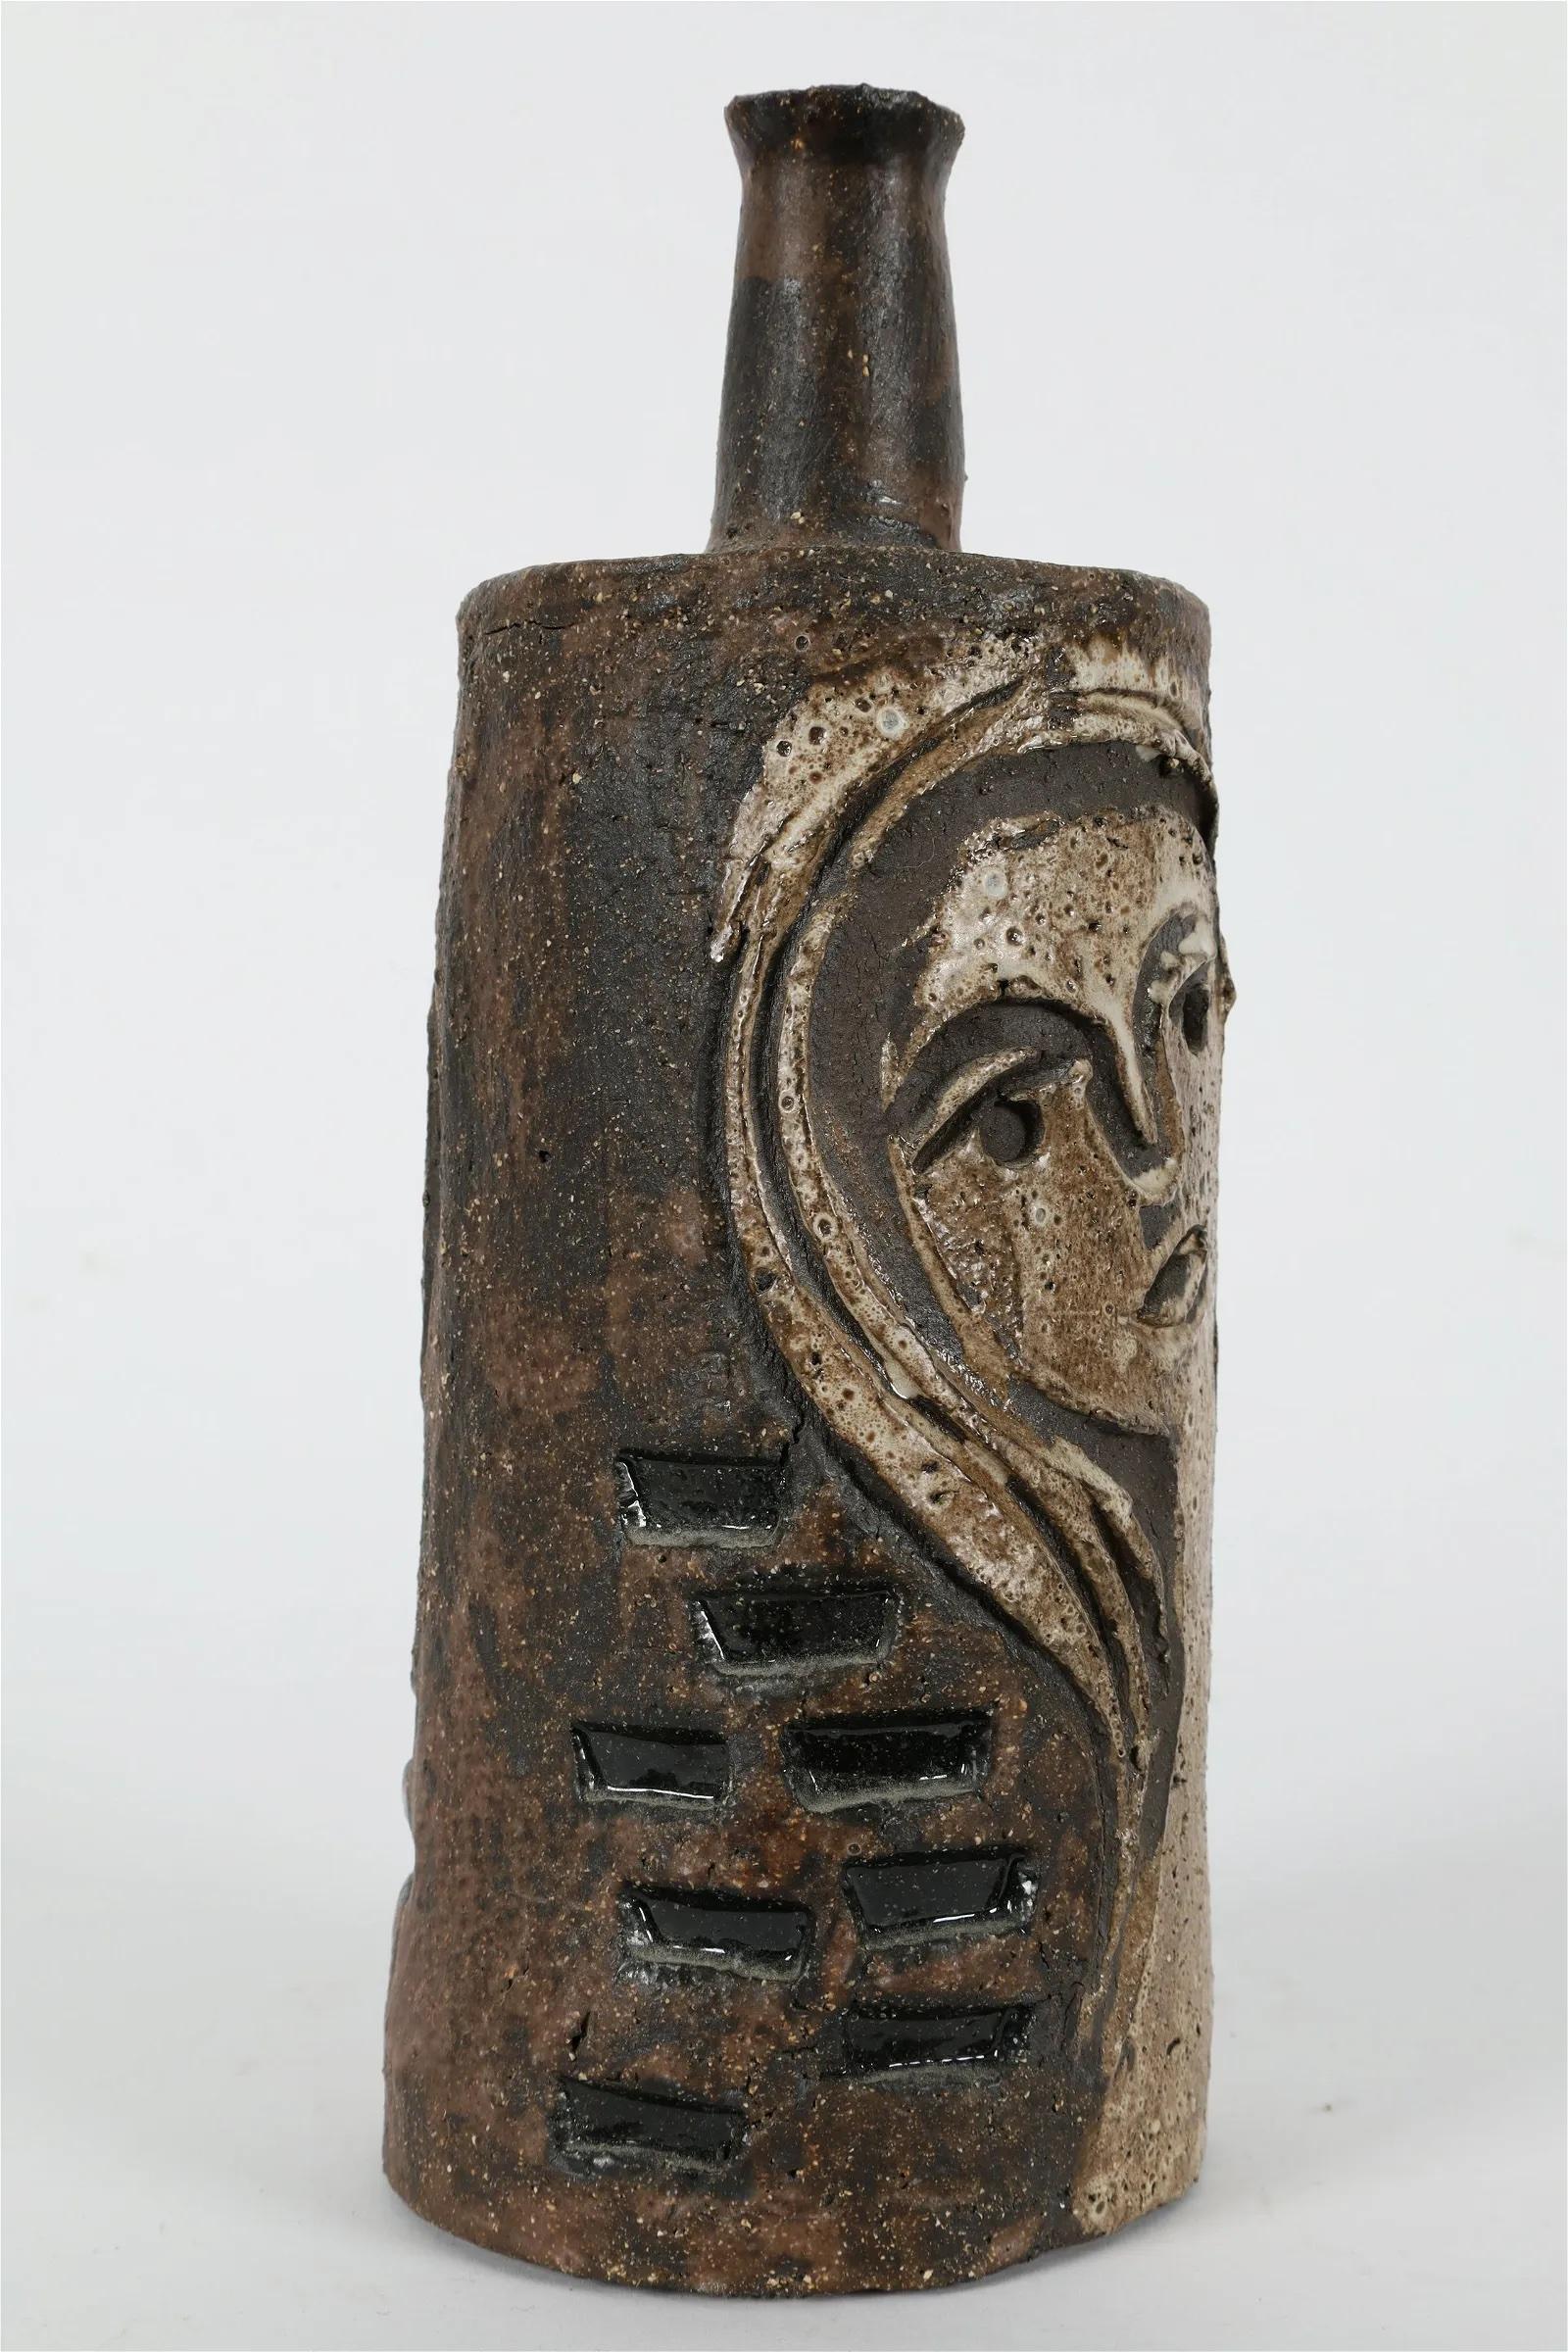 Ceramic bottle shaped vase with faces engraved decorations by Charles Sucsan.